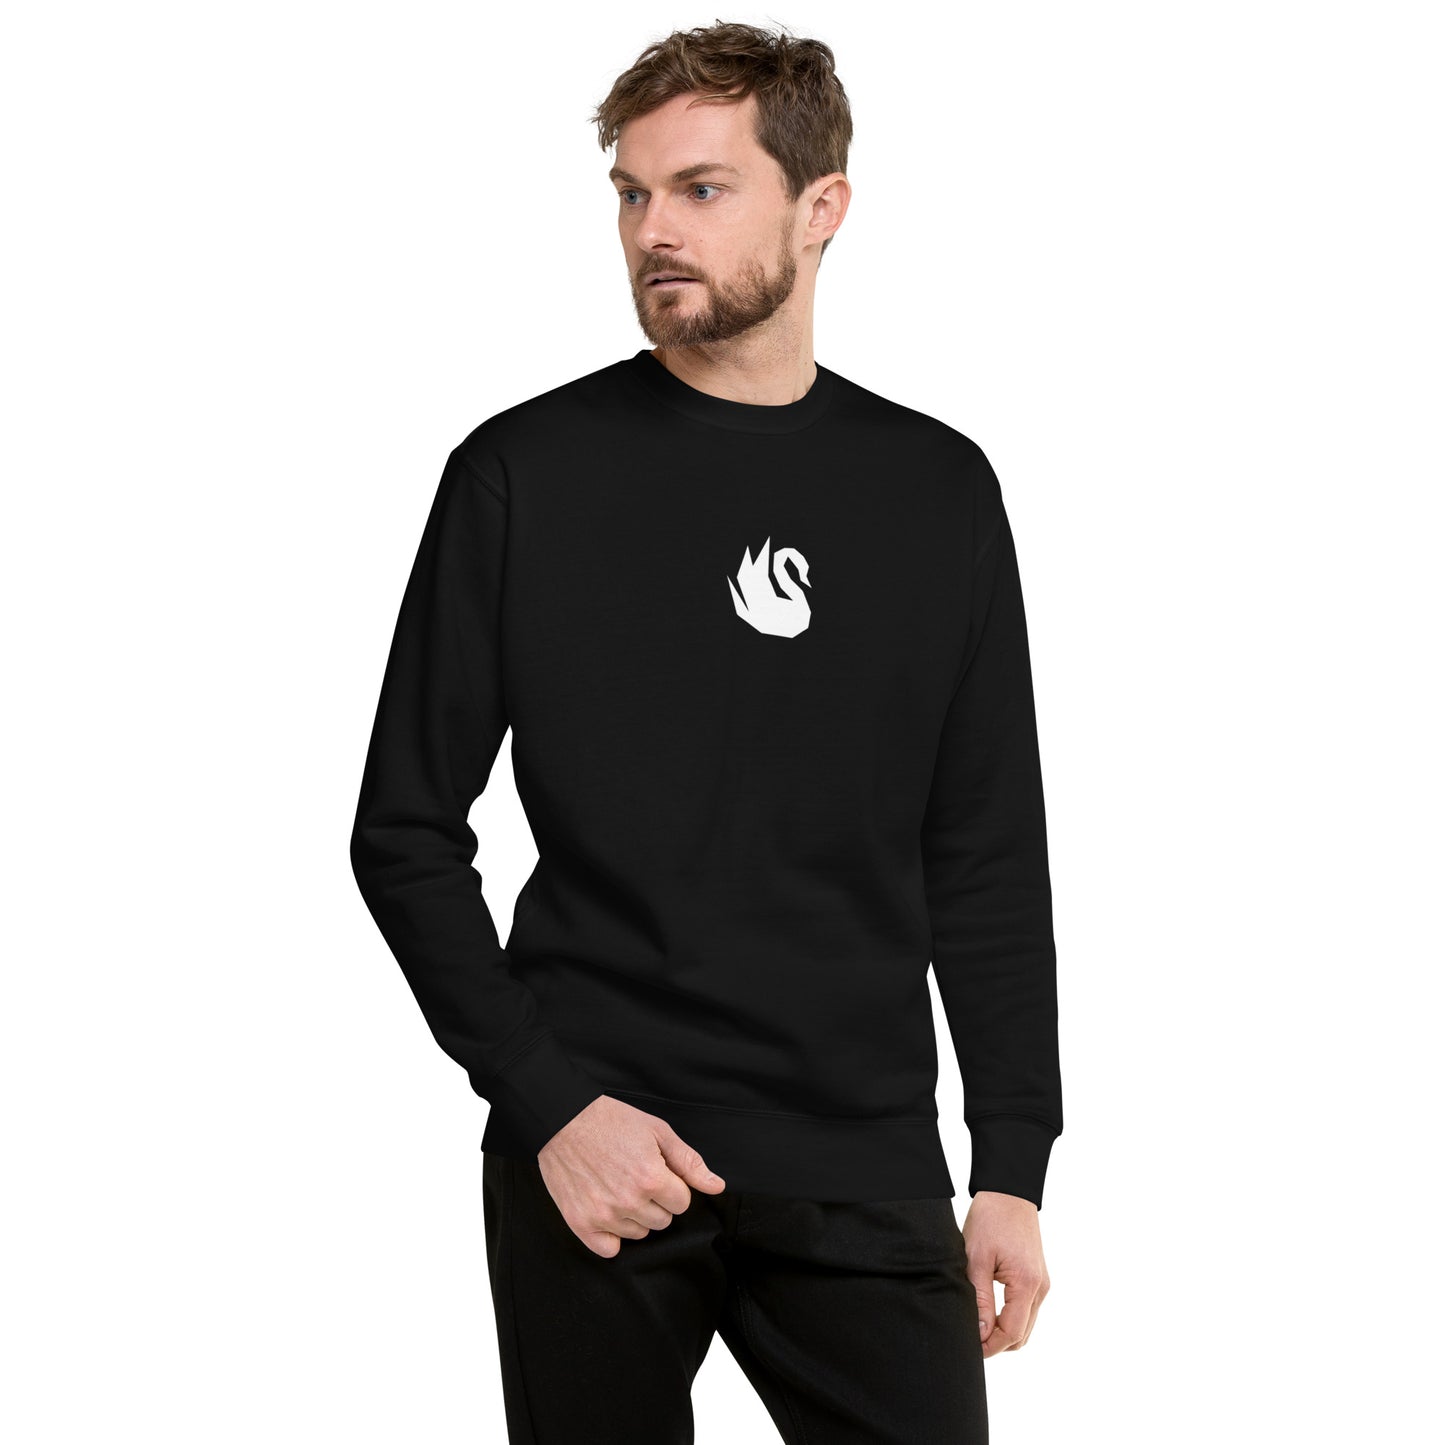 Featuring our iconic Cygnus Crest intricately fitted on the chest, it's a symbol of cosmic sophistication and timeless charm. With its sumptuously soft fabric and impeccable fit, the Cosmic Comfort Premium Sweatshirt is designed to elevate your everyday wardrobe effortlessly. Embrace comfort without compromising on style and make a statement wherever you go with Cygnus Empire.